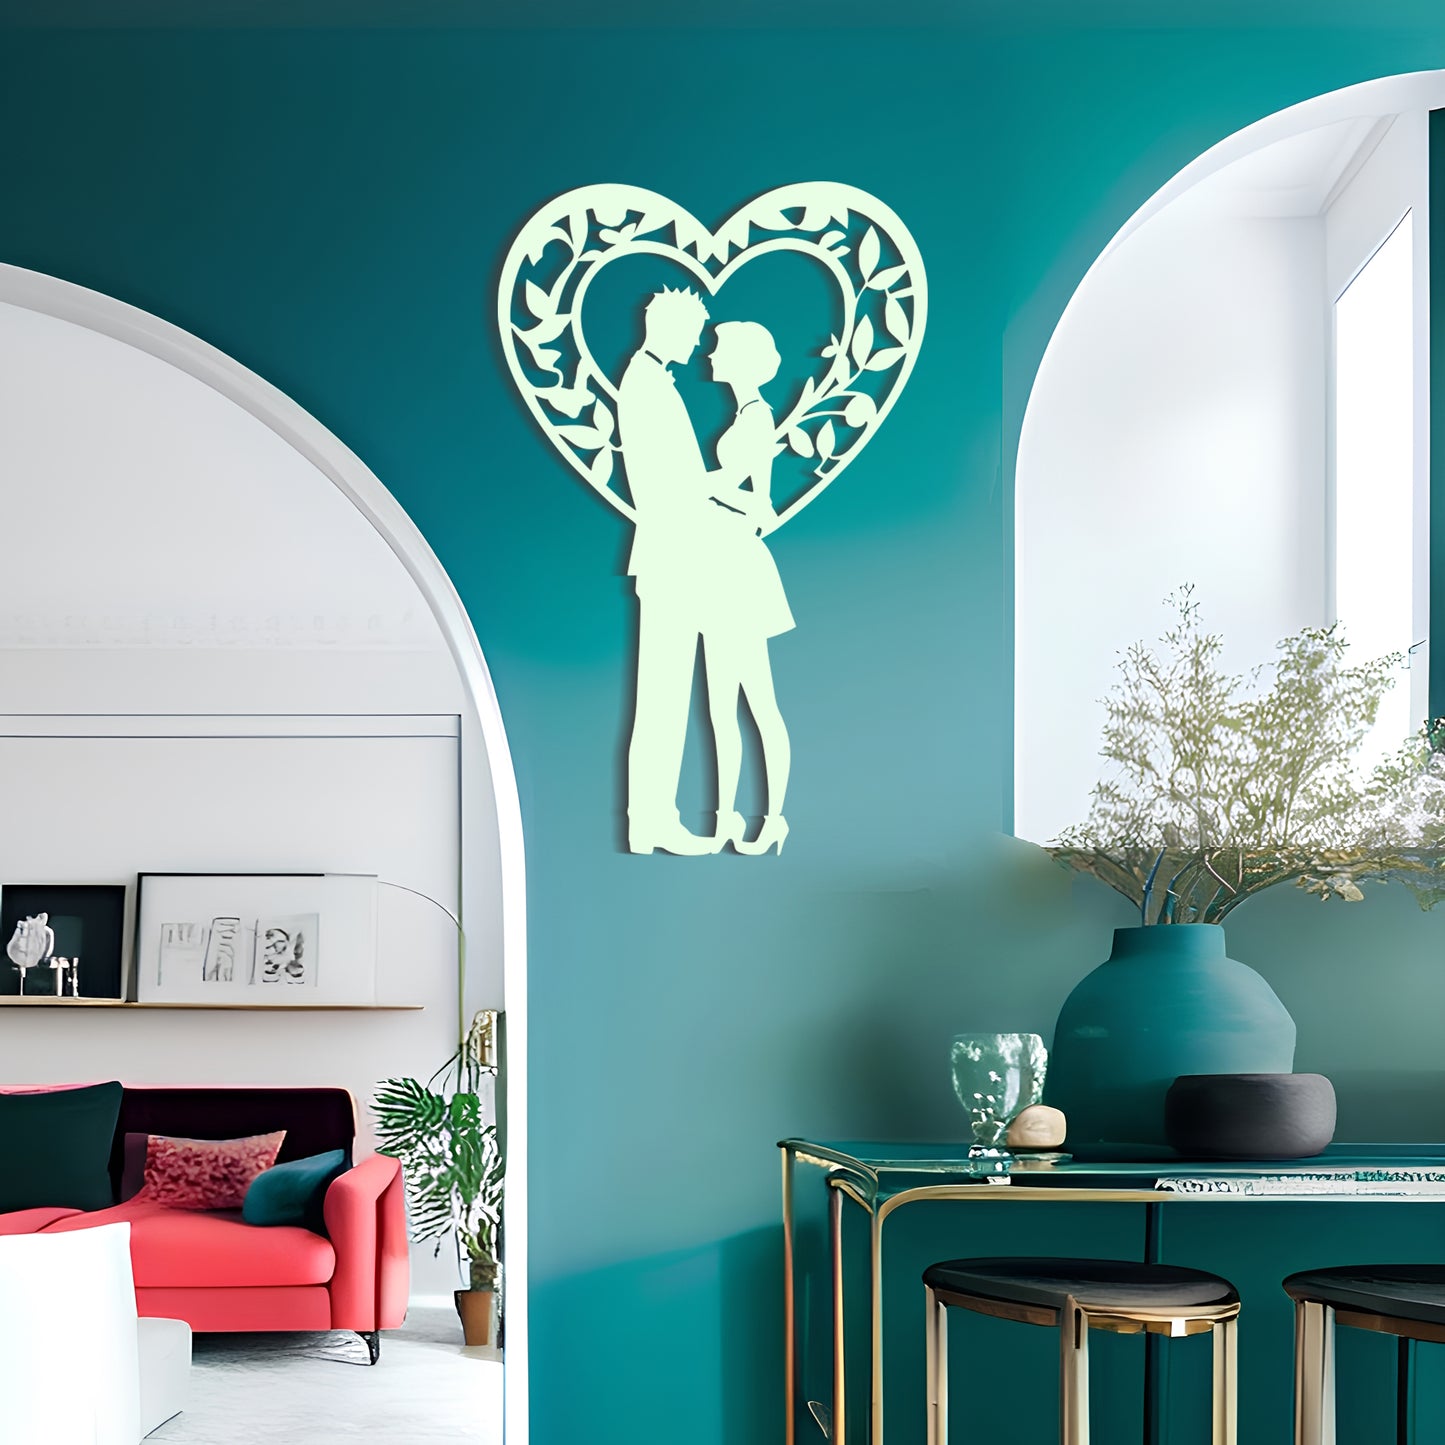 Romantic Silhouette Wall Decor with Heart